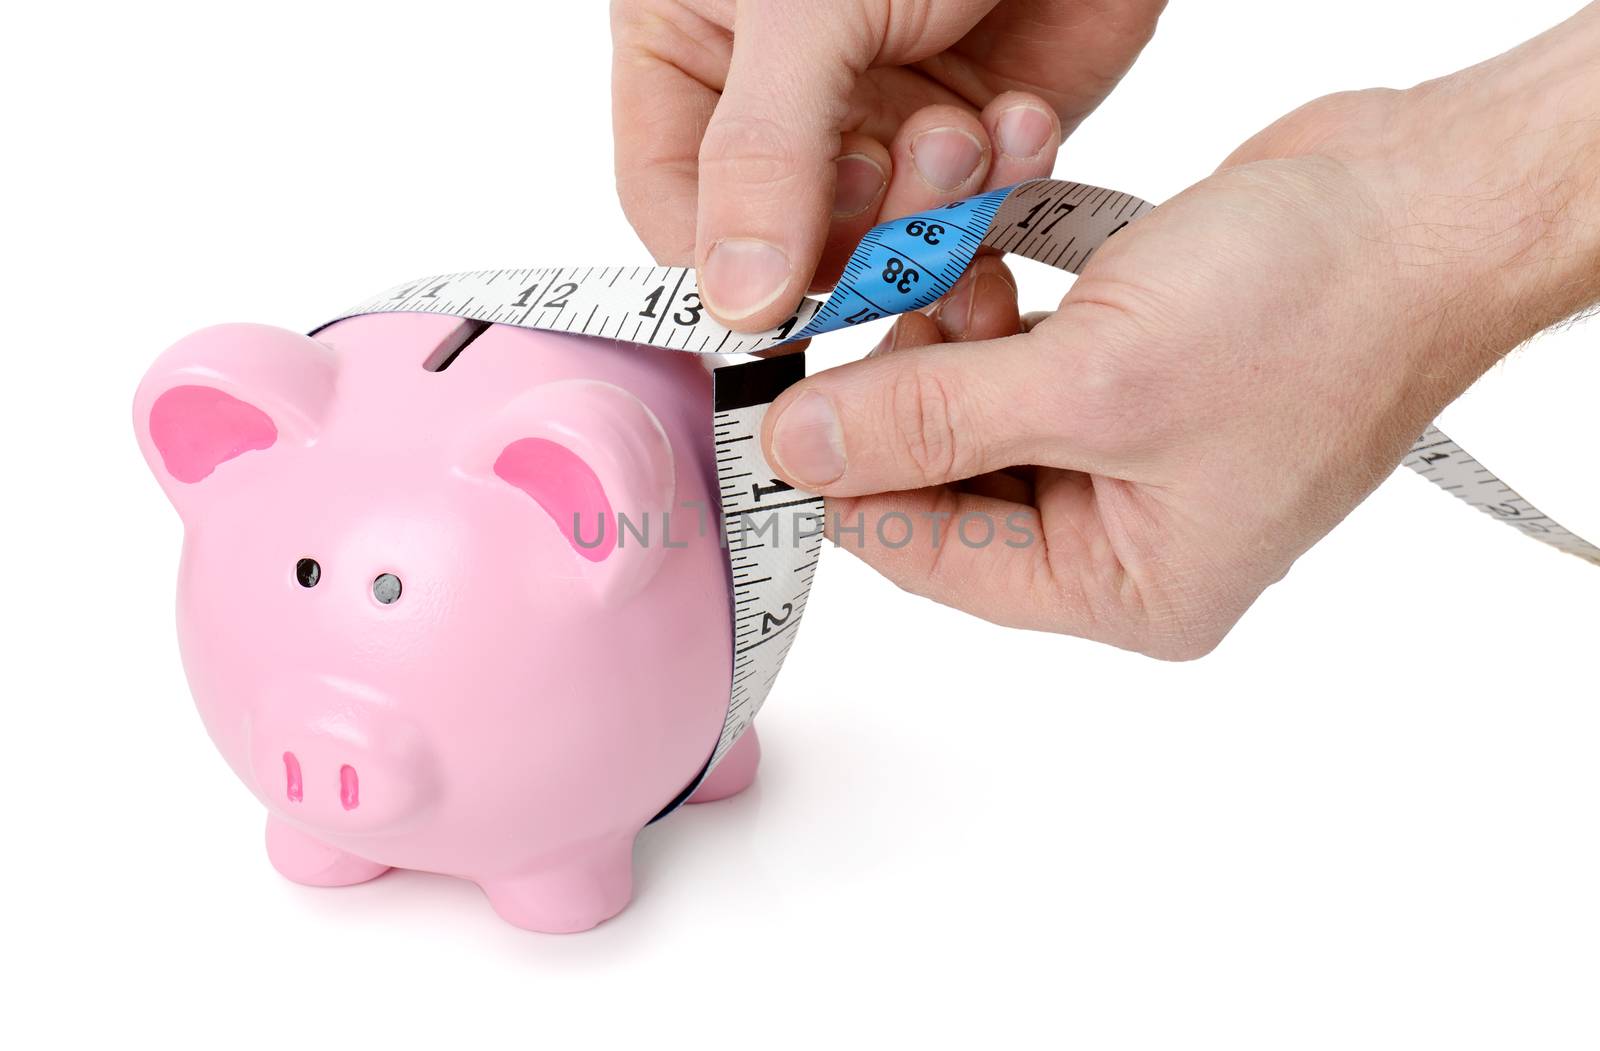 Concept of measuring your wealth, measuring tape around a piggy bank isolated on a white background